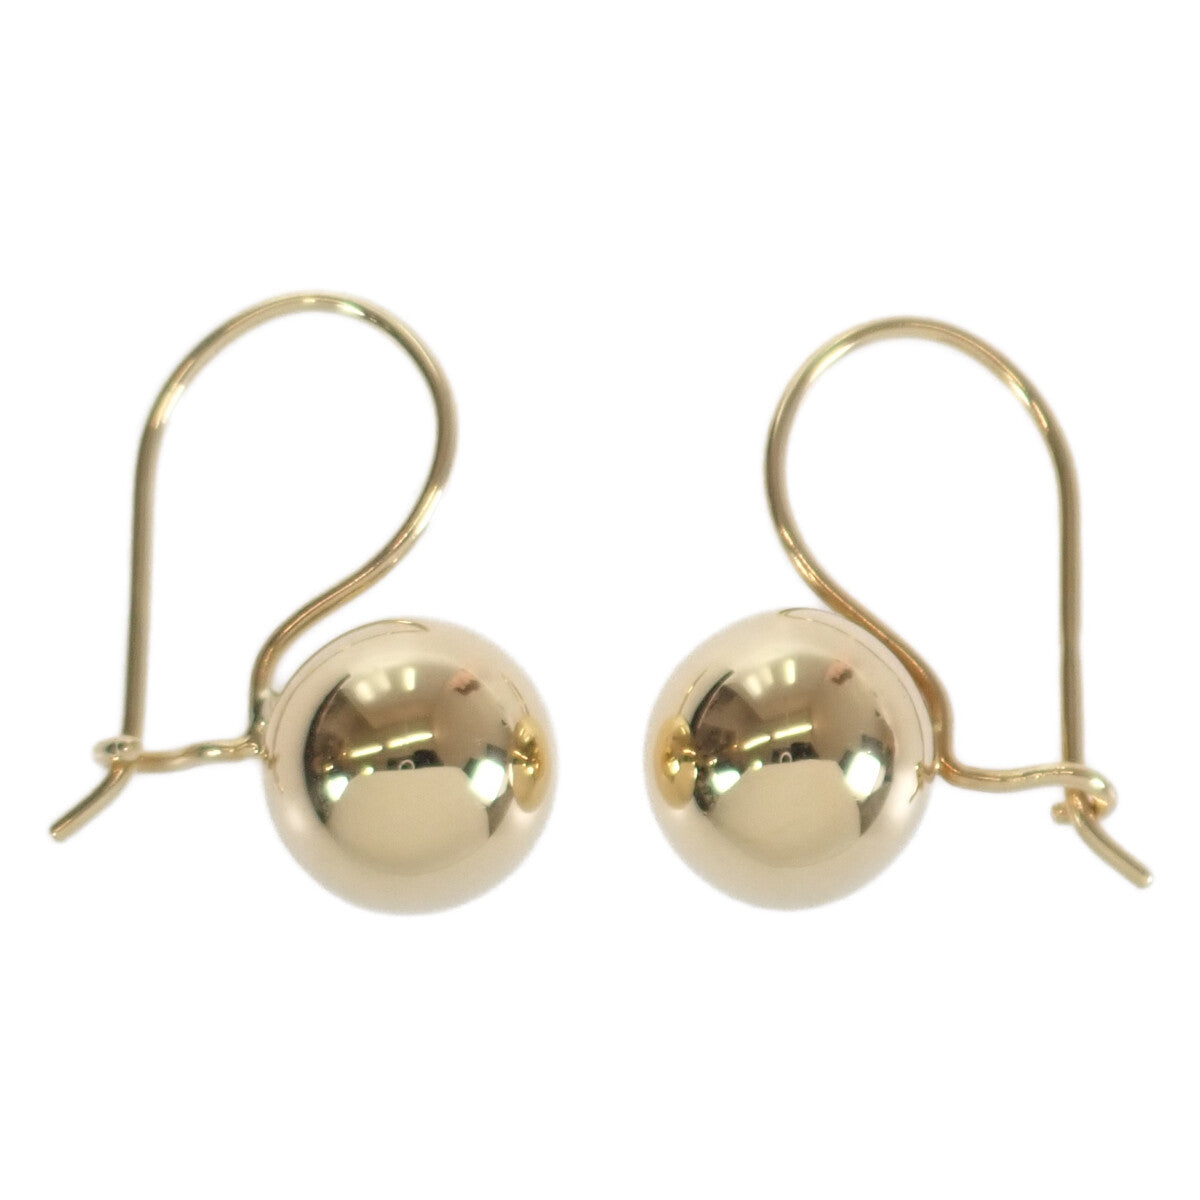 K18 Yellow Gold French Hook Ball Earrings, Ladies’, Preowned